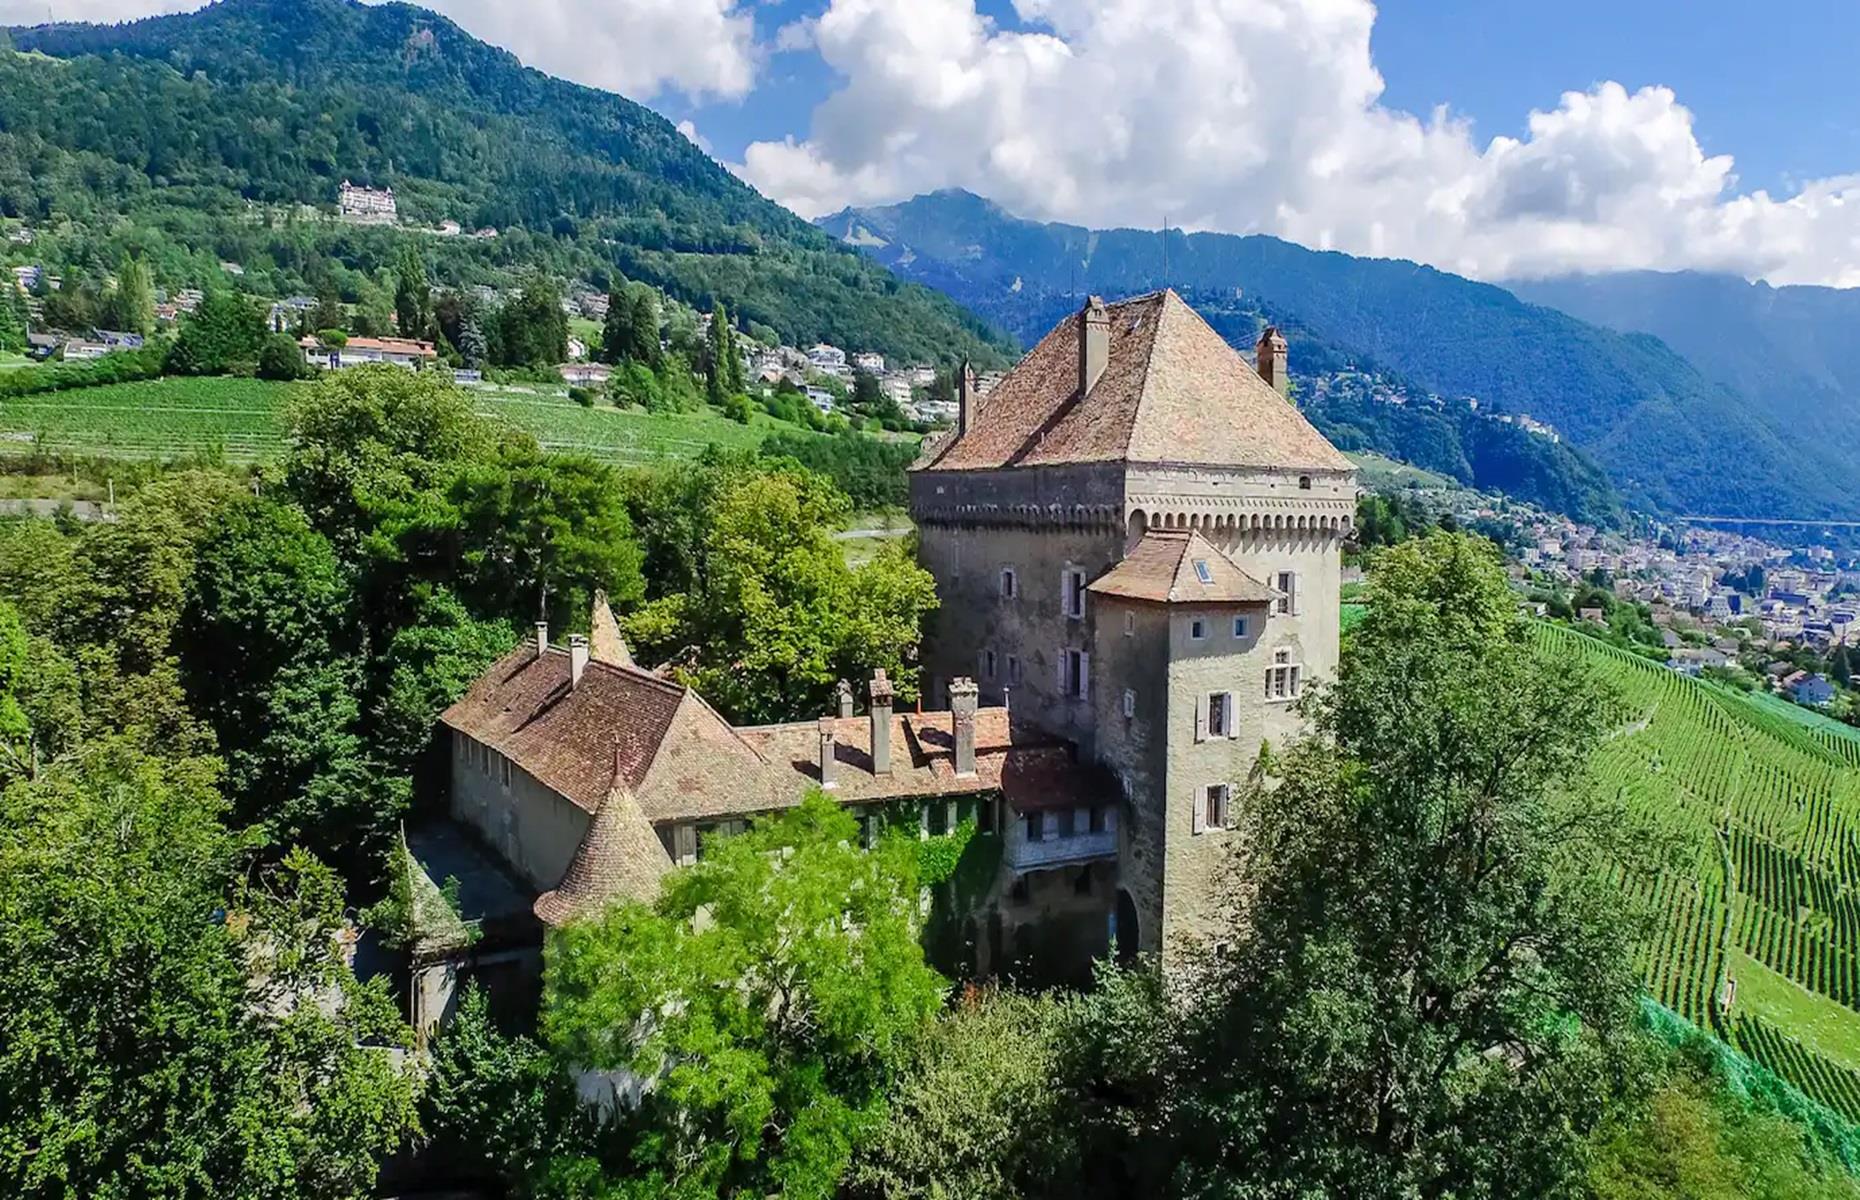 <p>Château du Châtelard is a real medieval castle that was built in 1441. Positioned in Montreux, in the heart of the Swiss Riviera, the ancient residence stands proud on a hill, with mesmerising views across the peaks and troughs of the region.</p>